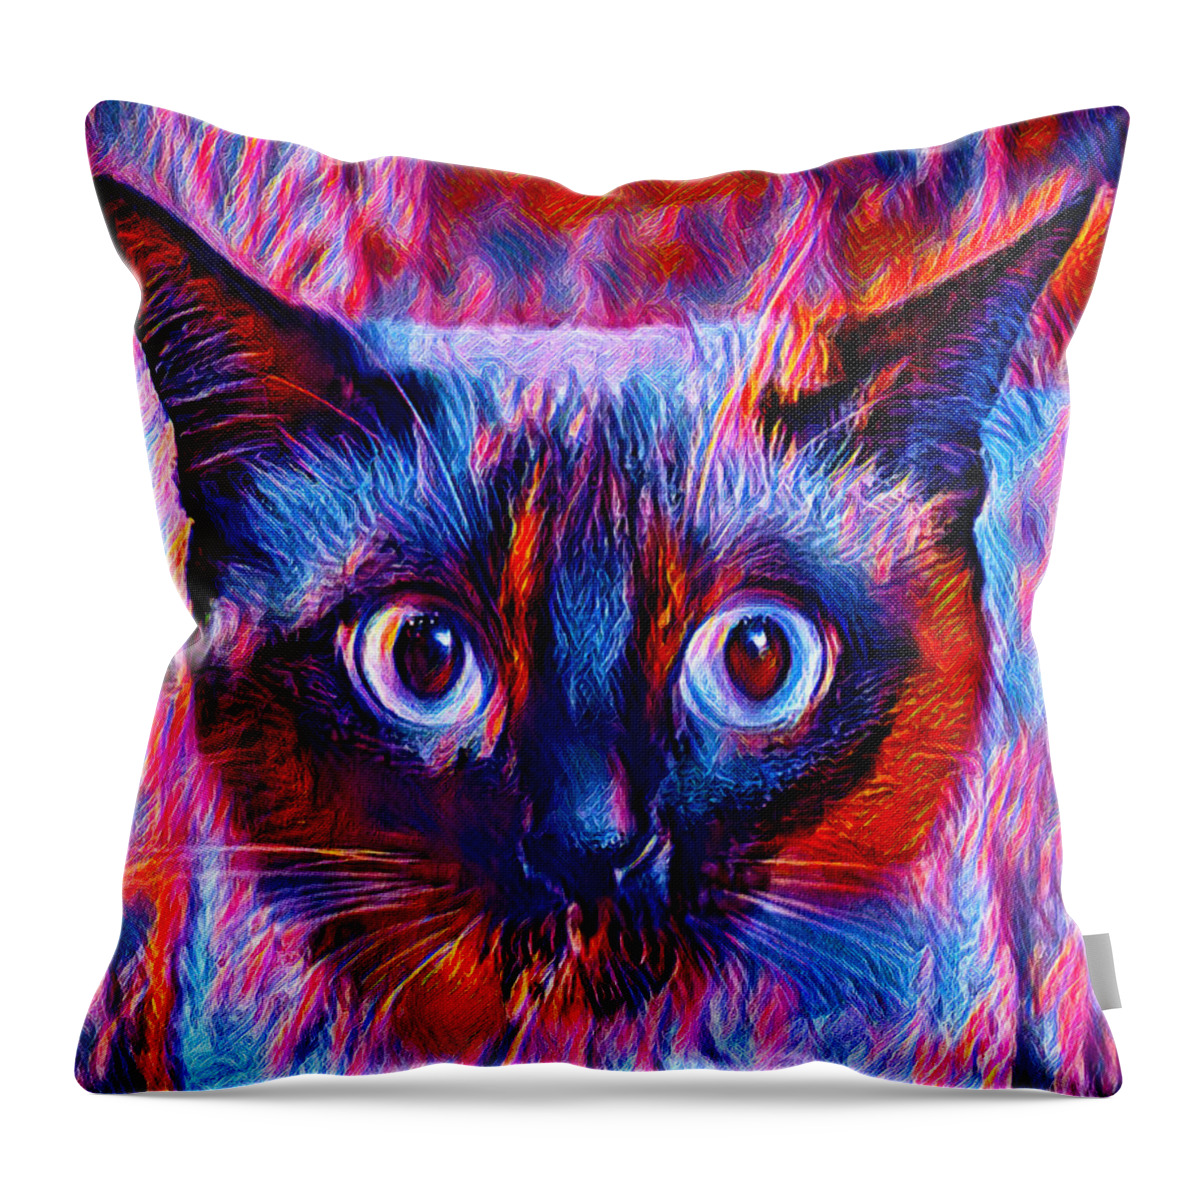 Siamese Cat Throw Pillow featuring the digital art Cute Siamese cat head in blue and violet - digital painting by Nicko Prints